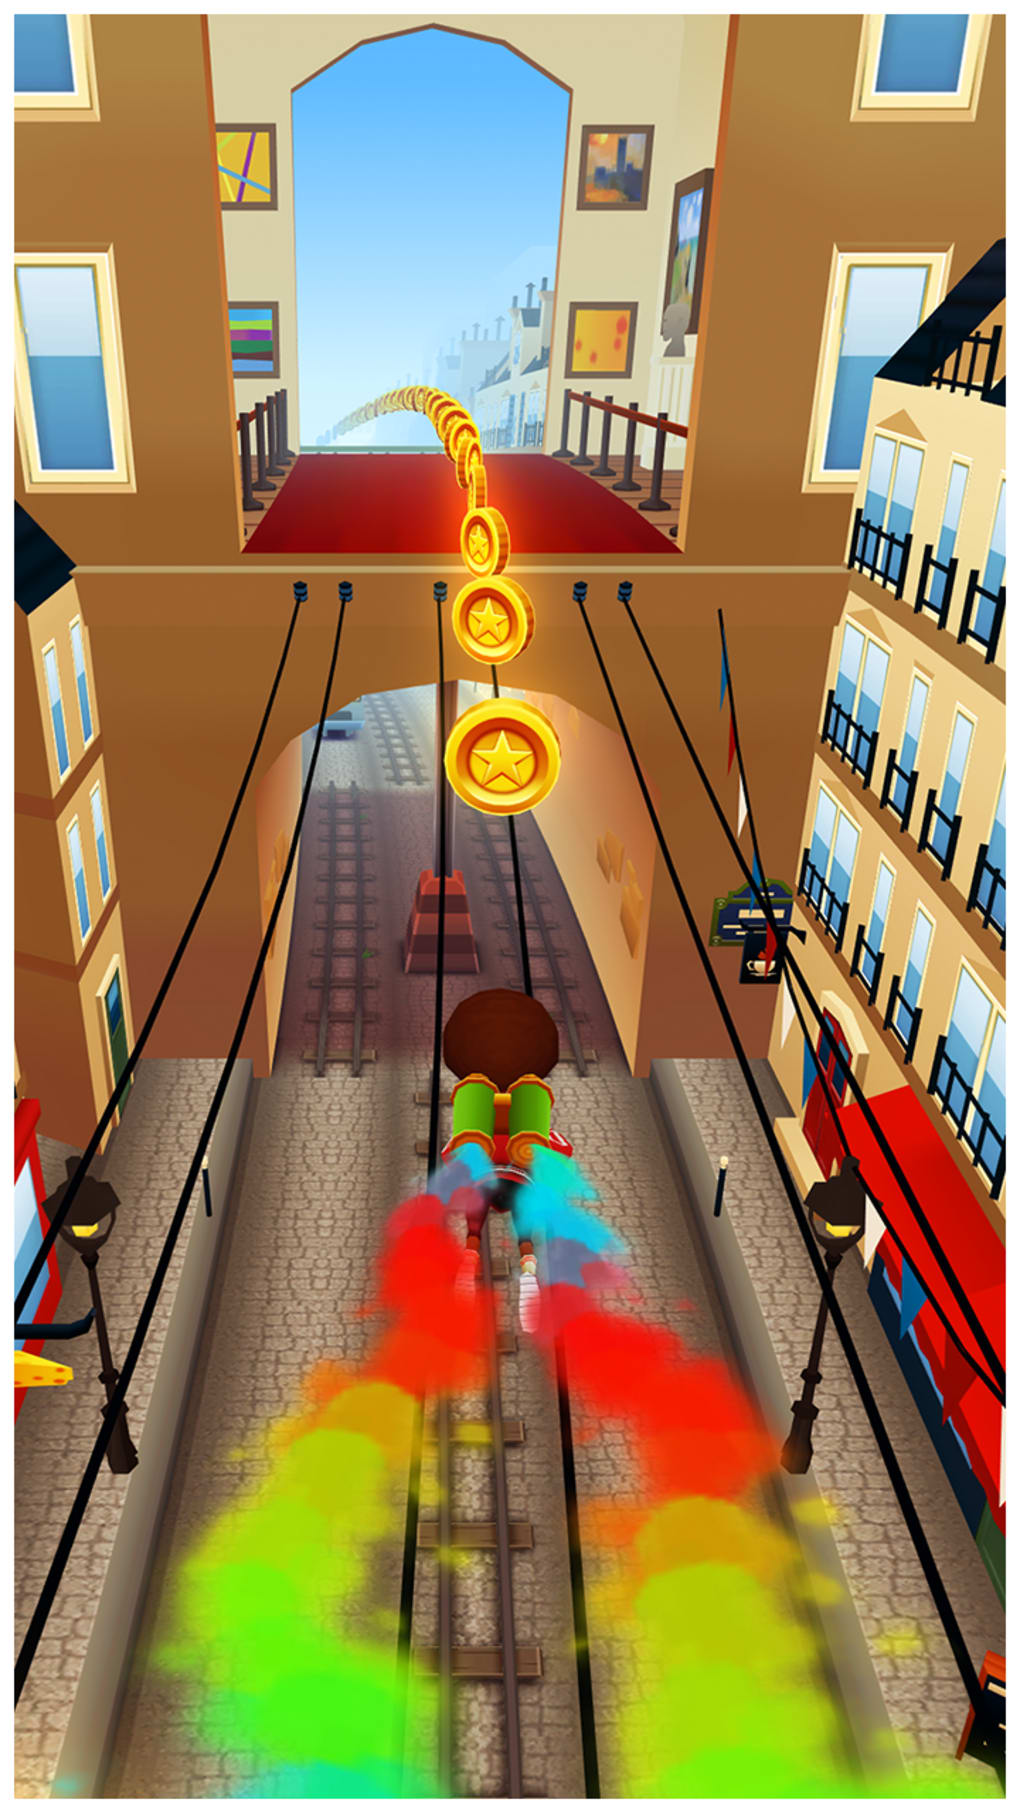 Free download Subway Surfers for Samsung Galaxy J7 Prime, APK